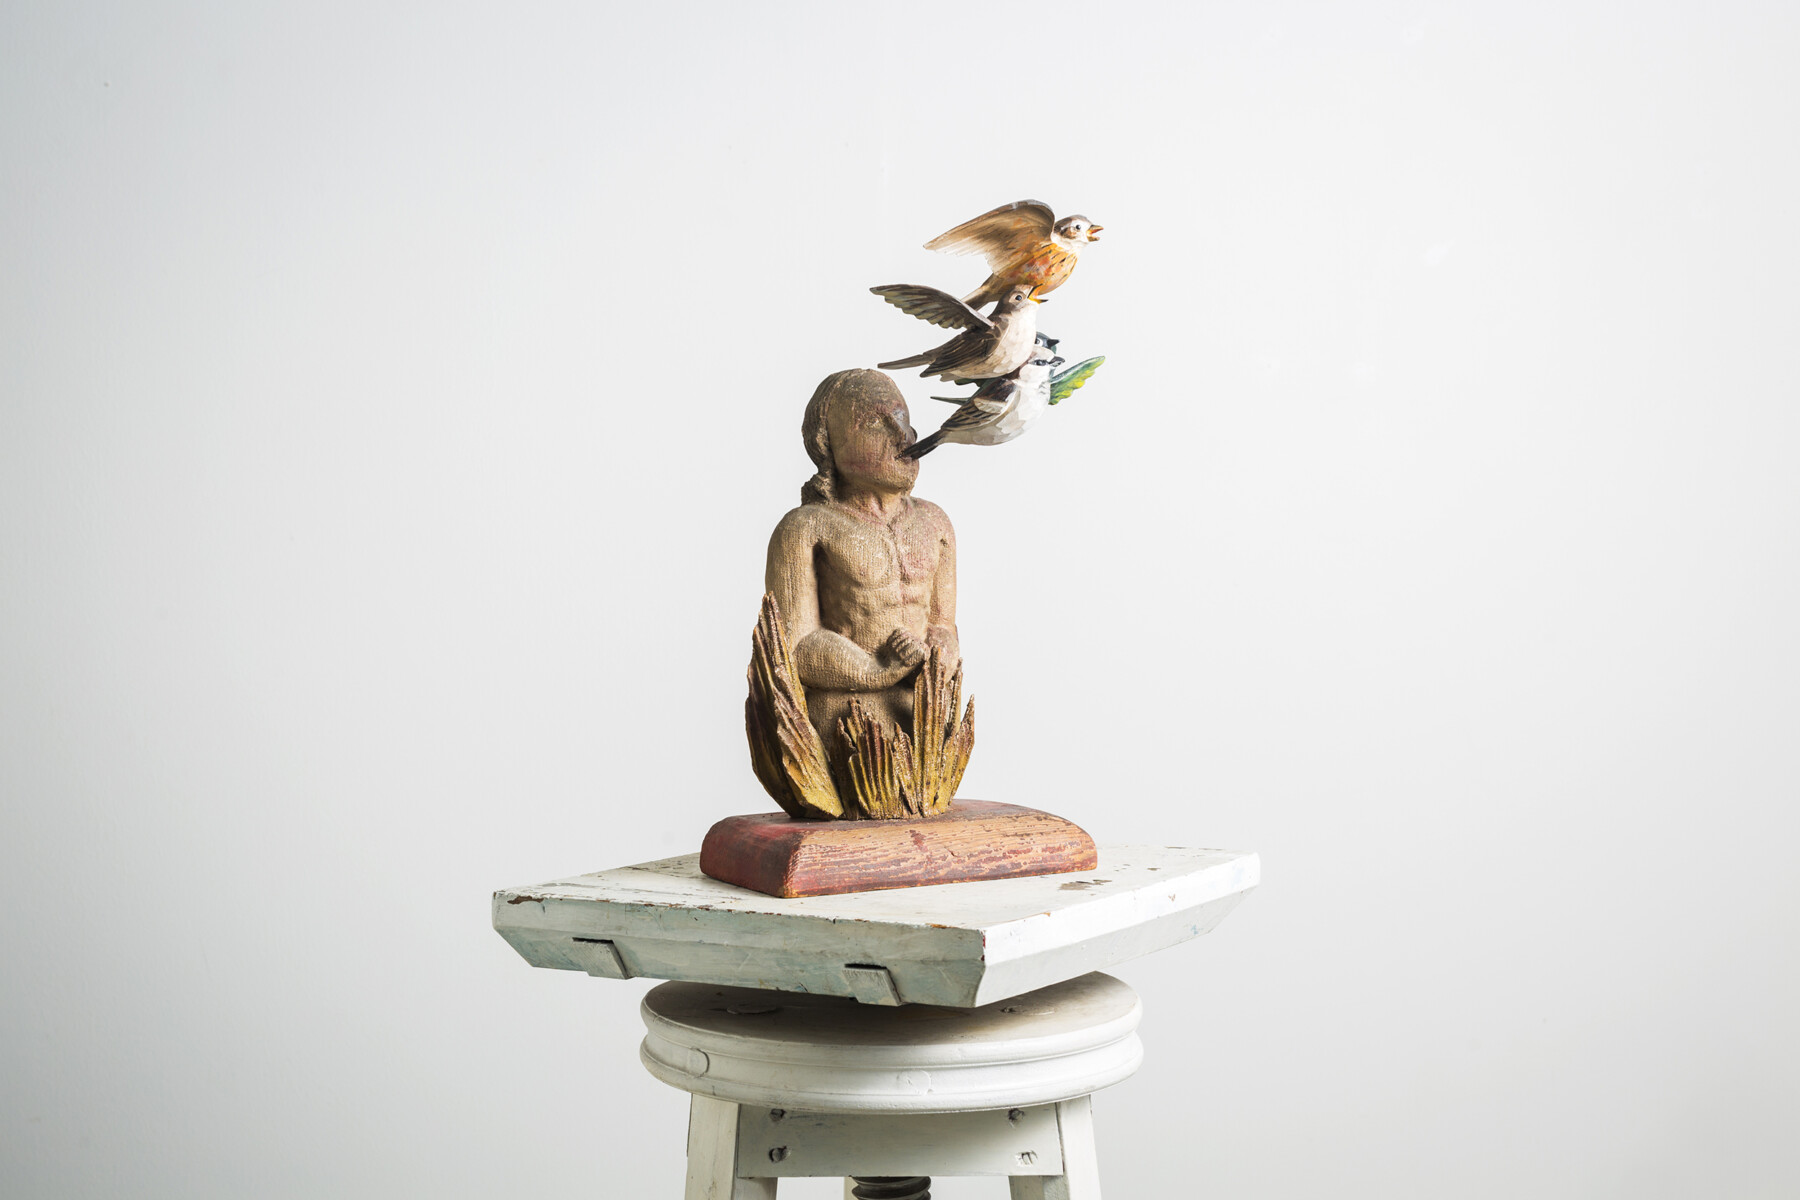 A pedestal holds a sculpture of a person with several colourful birds flying near its head or possibly out of its head.